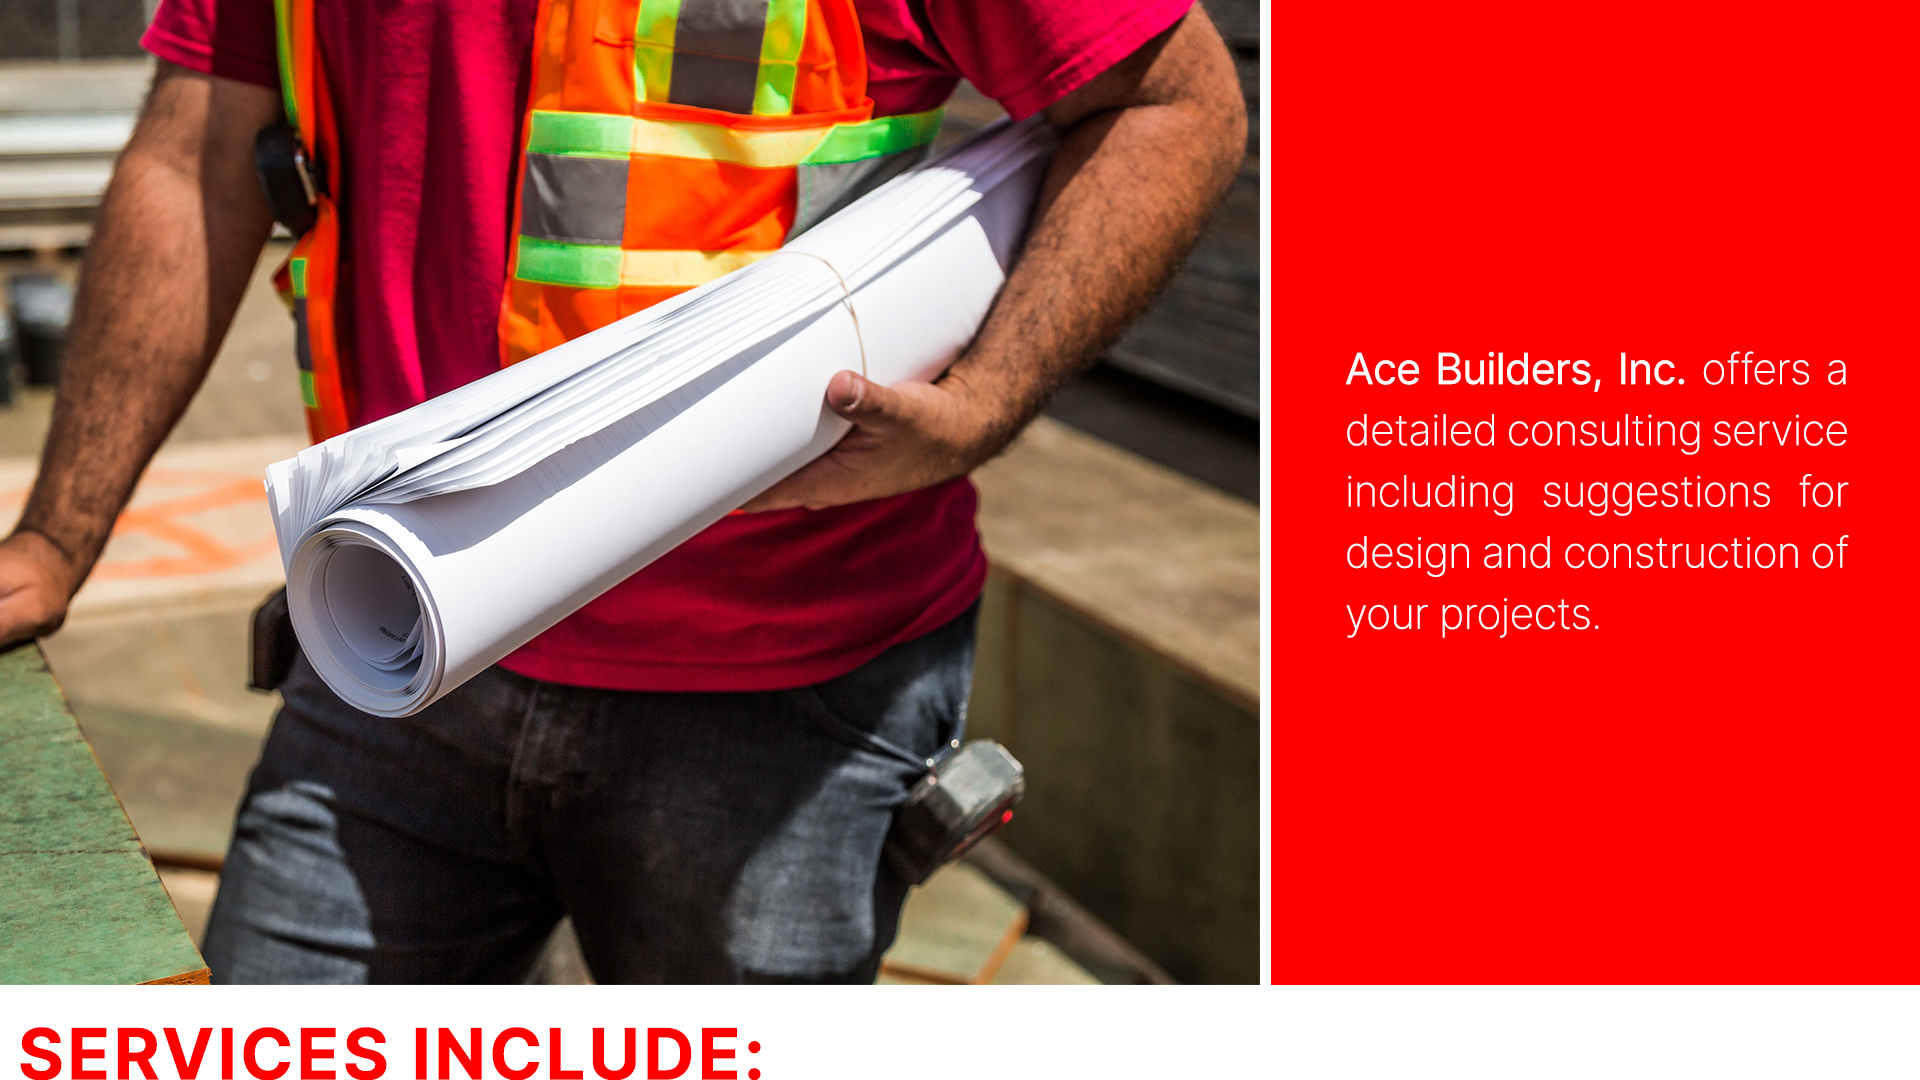 Ace Builders offers a detailed consulting service including suggestions for design and construction of your projects.